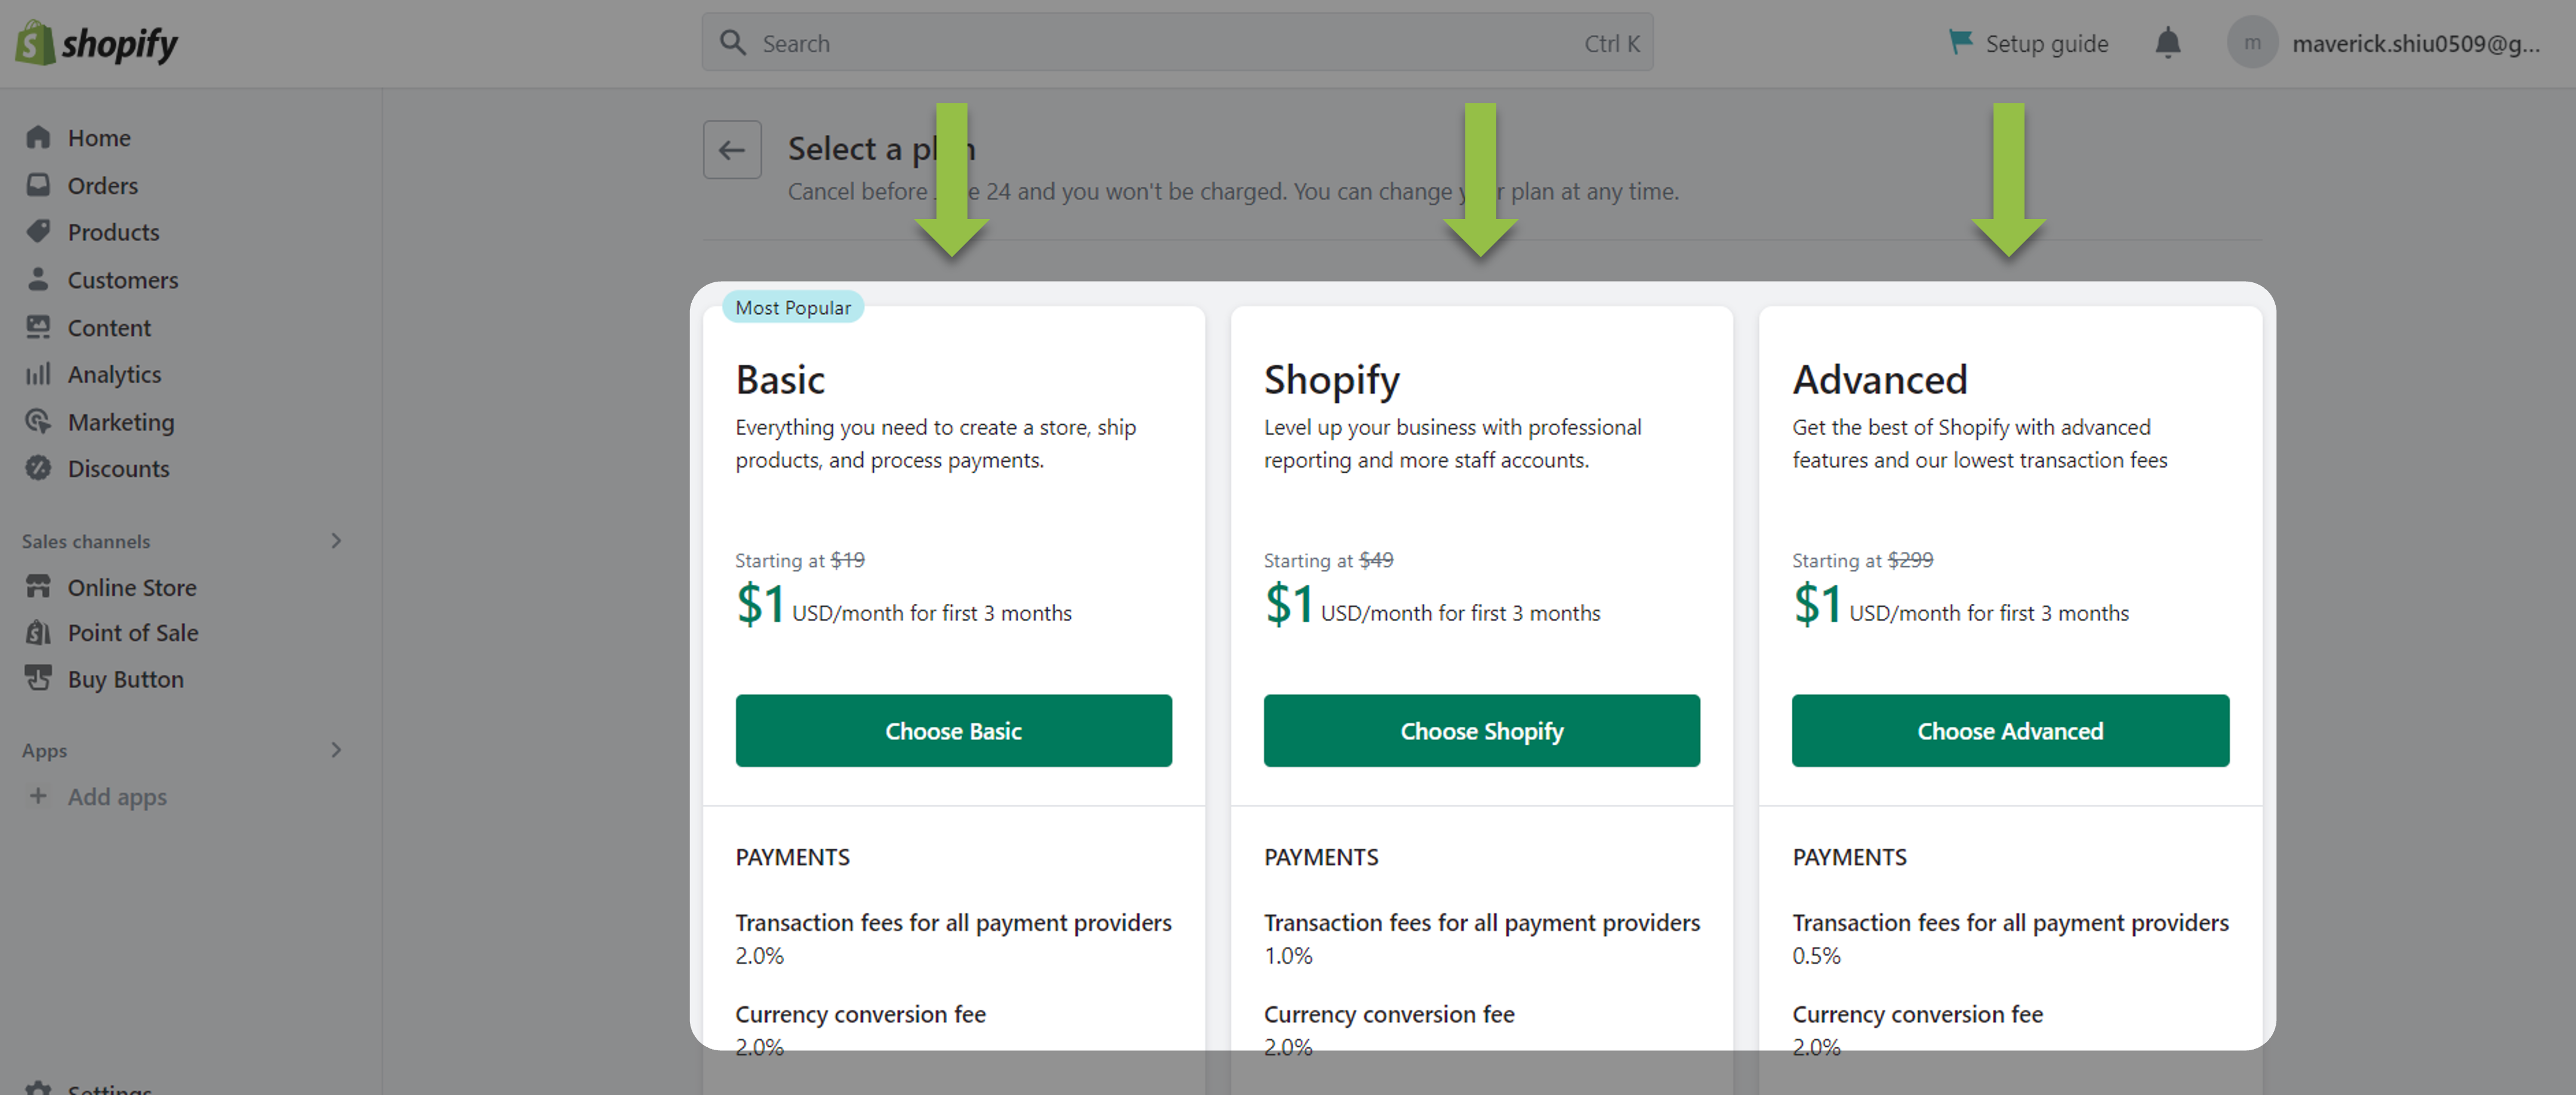 Choose a plan for your Shopify store